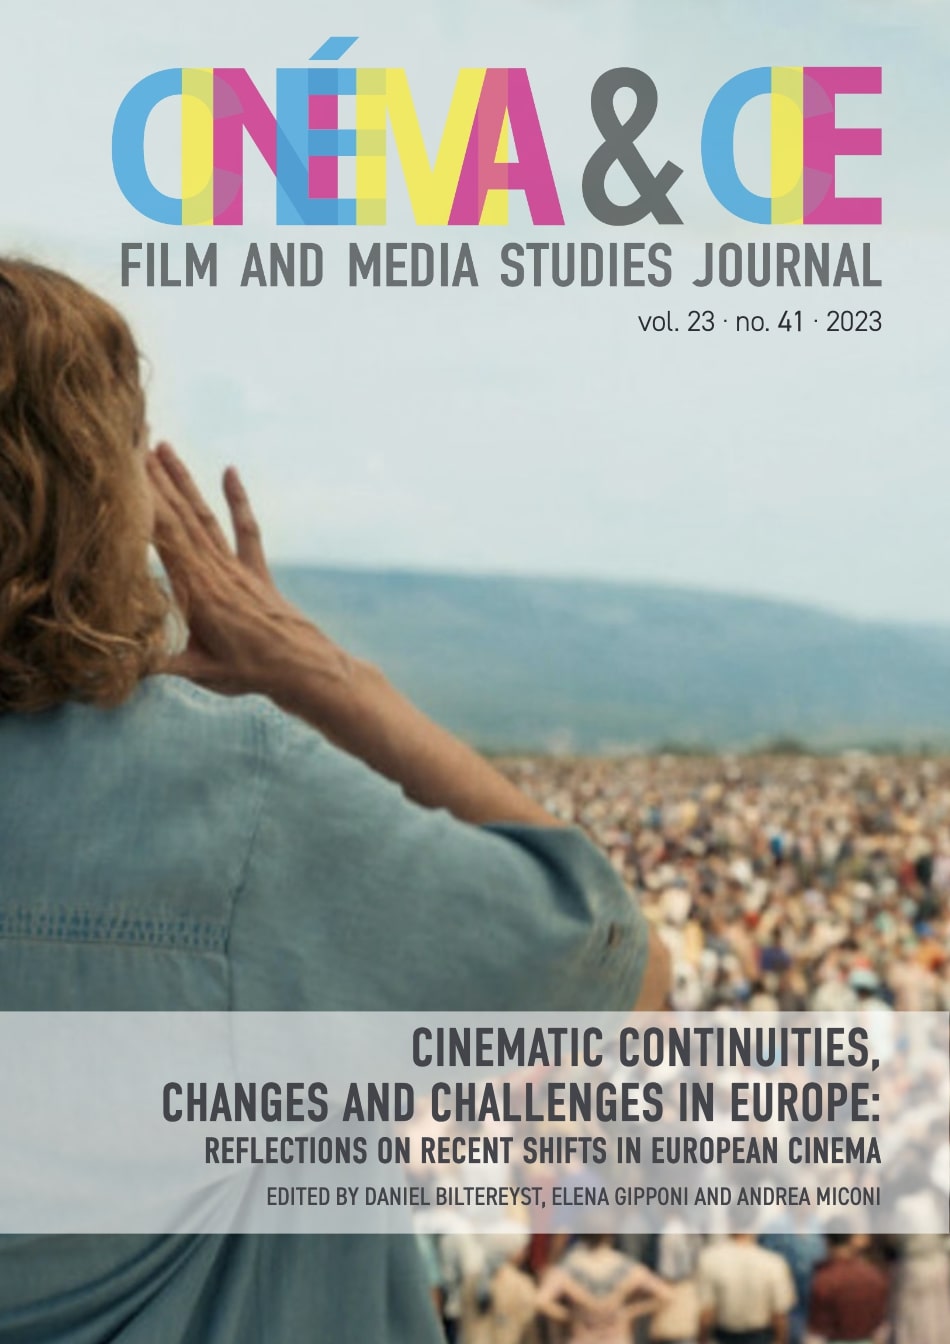 					View Vol. 23 No. 41 (2023): Cinematic Continuities, Changes and Challenges in Europe: Reflections on Recent Shifts in European Cinema
				